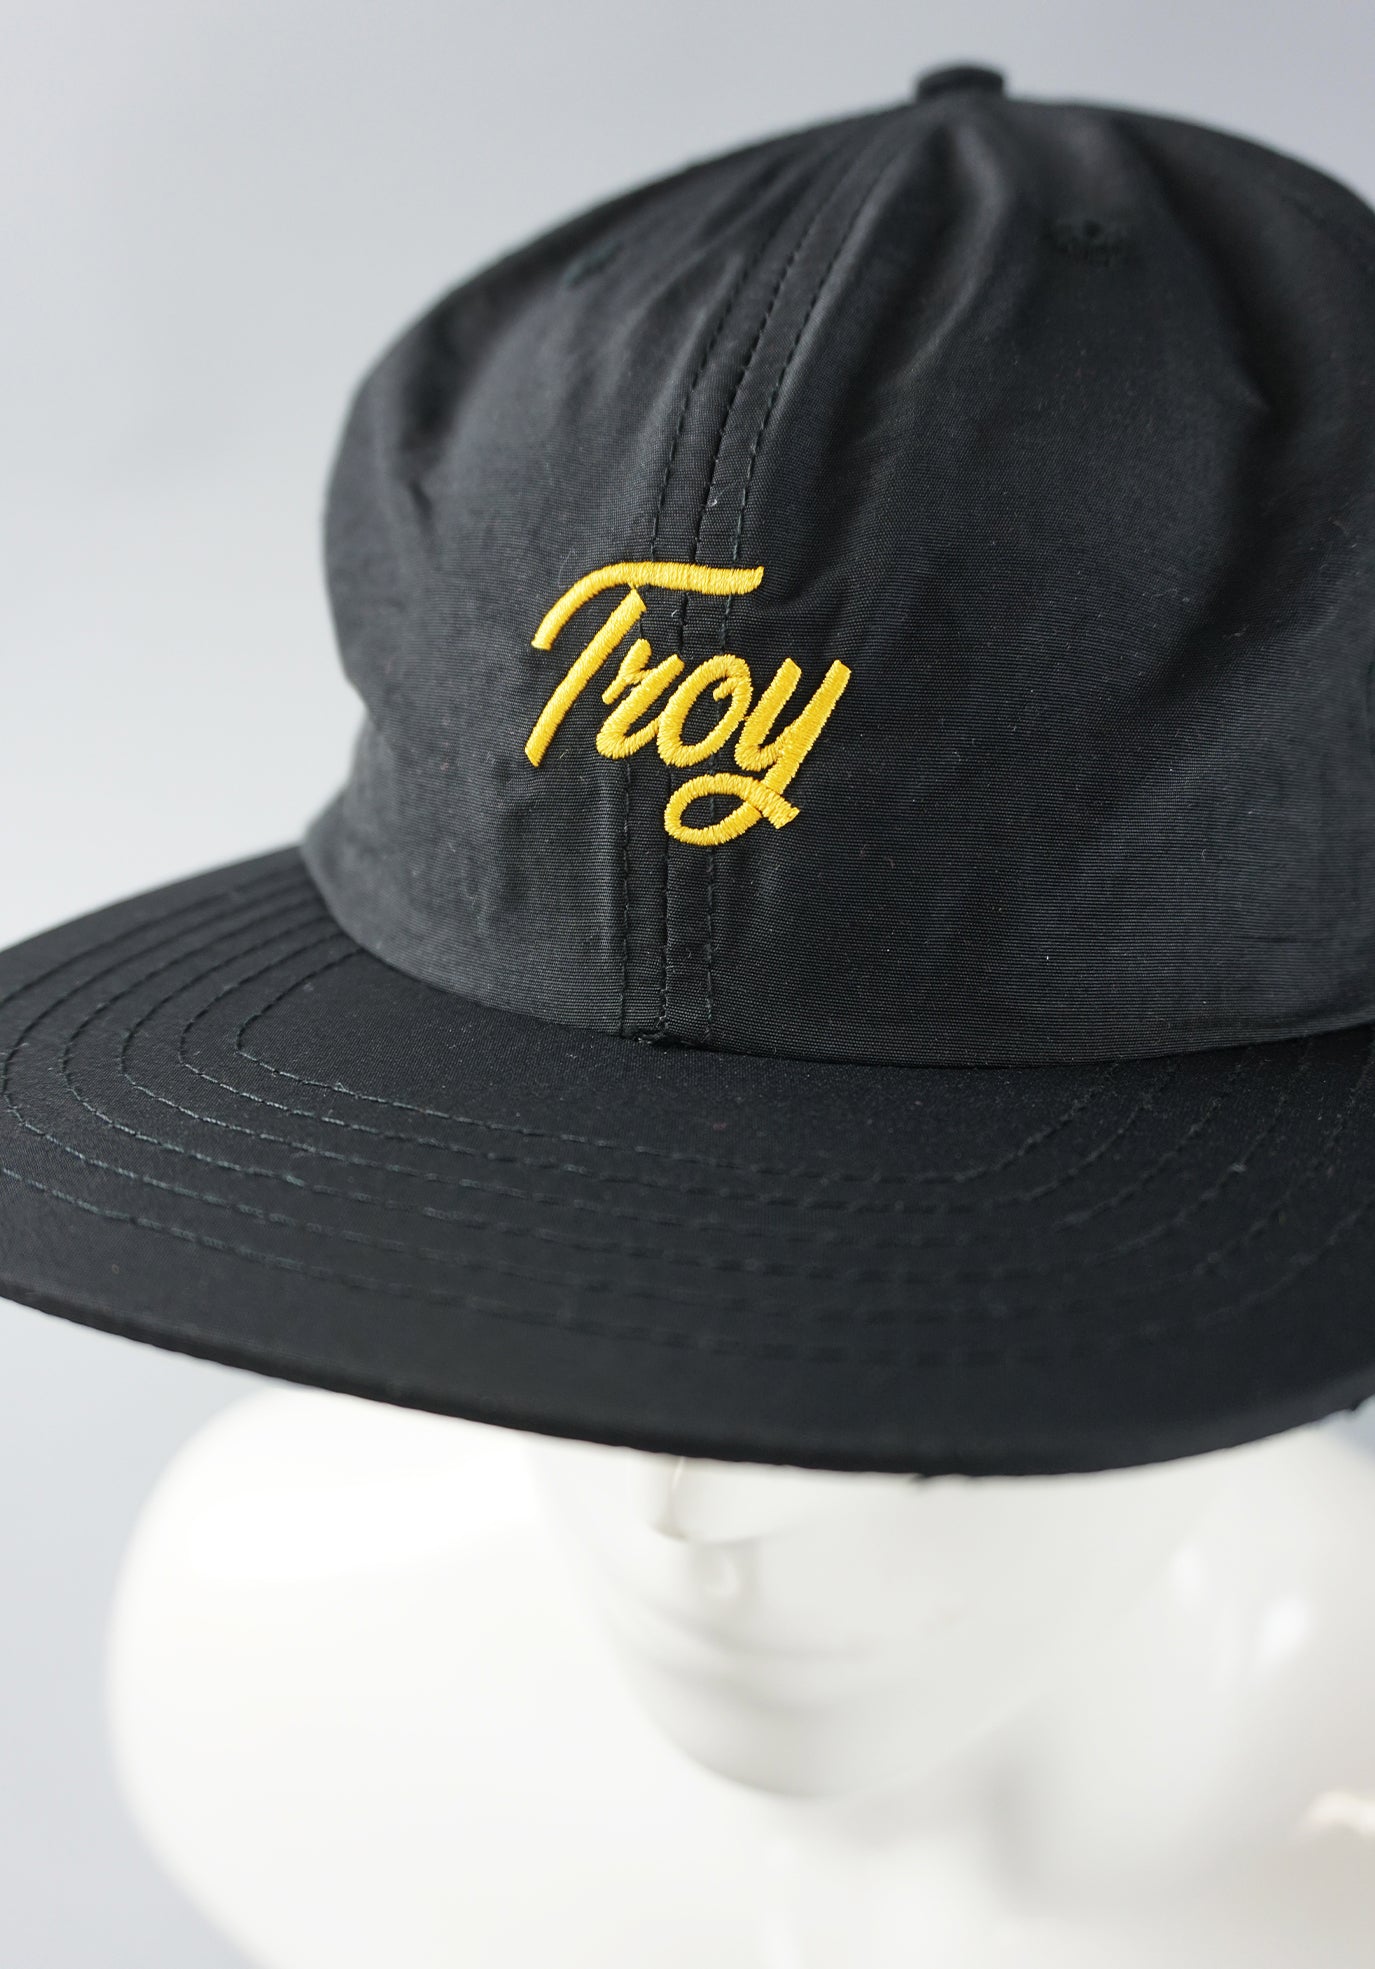 Close up of Troy script cap and gold embroidery.